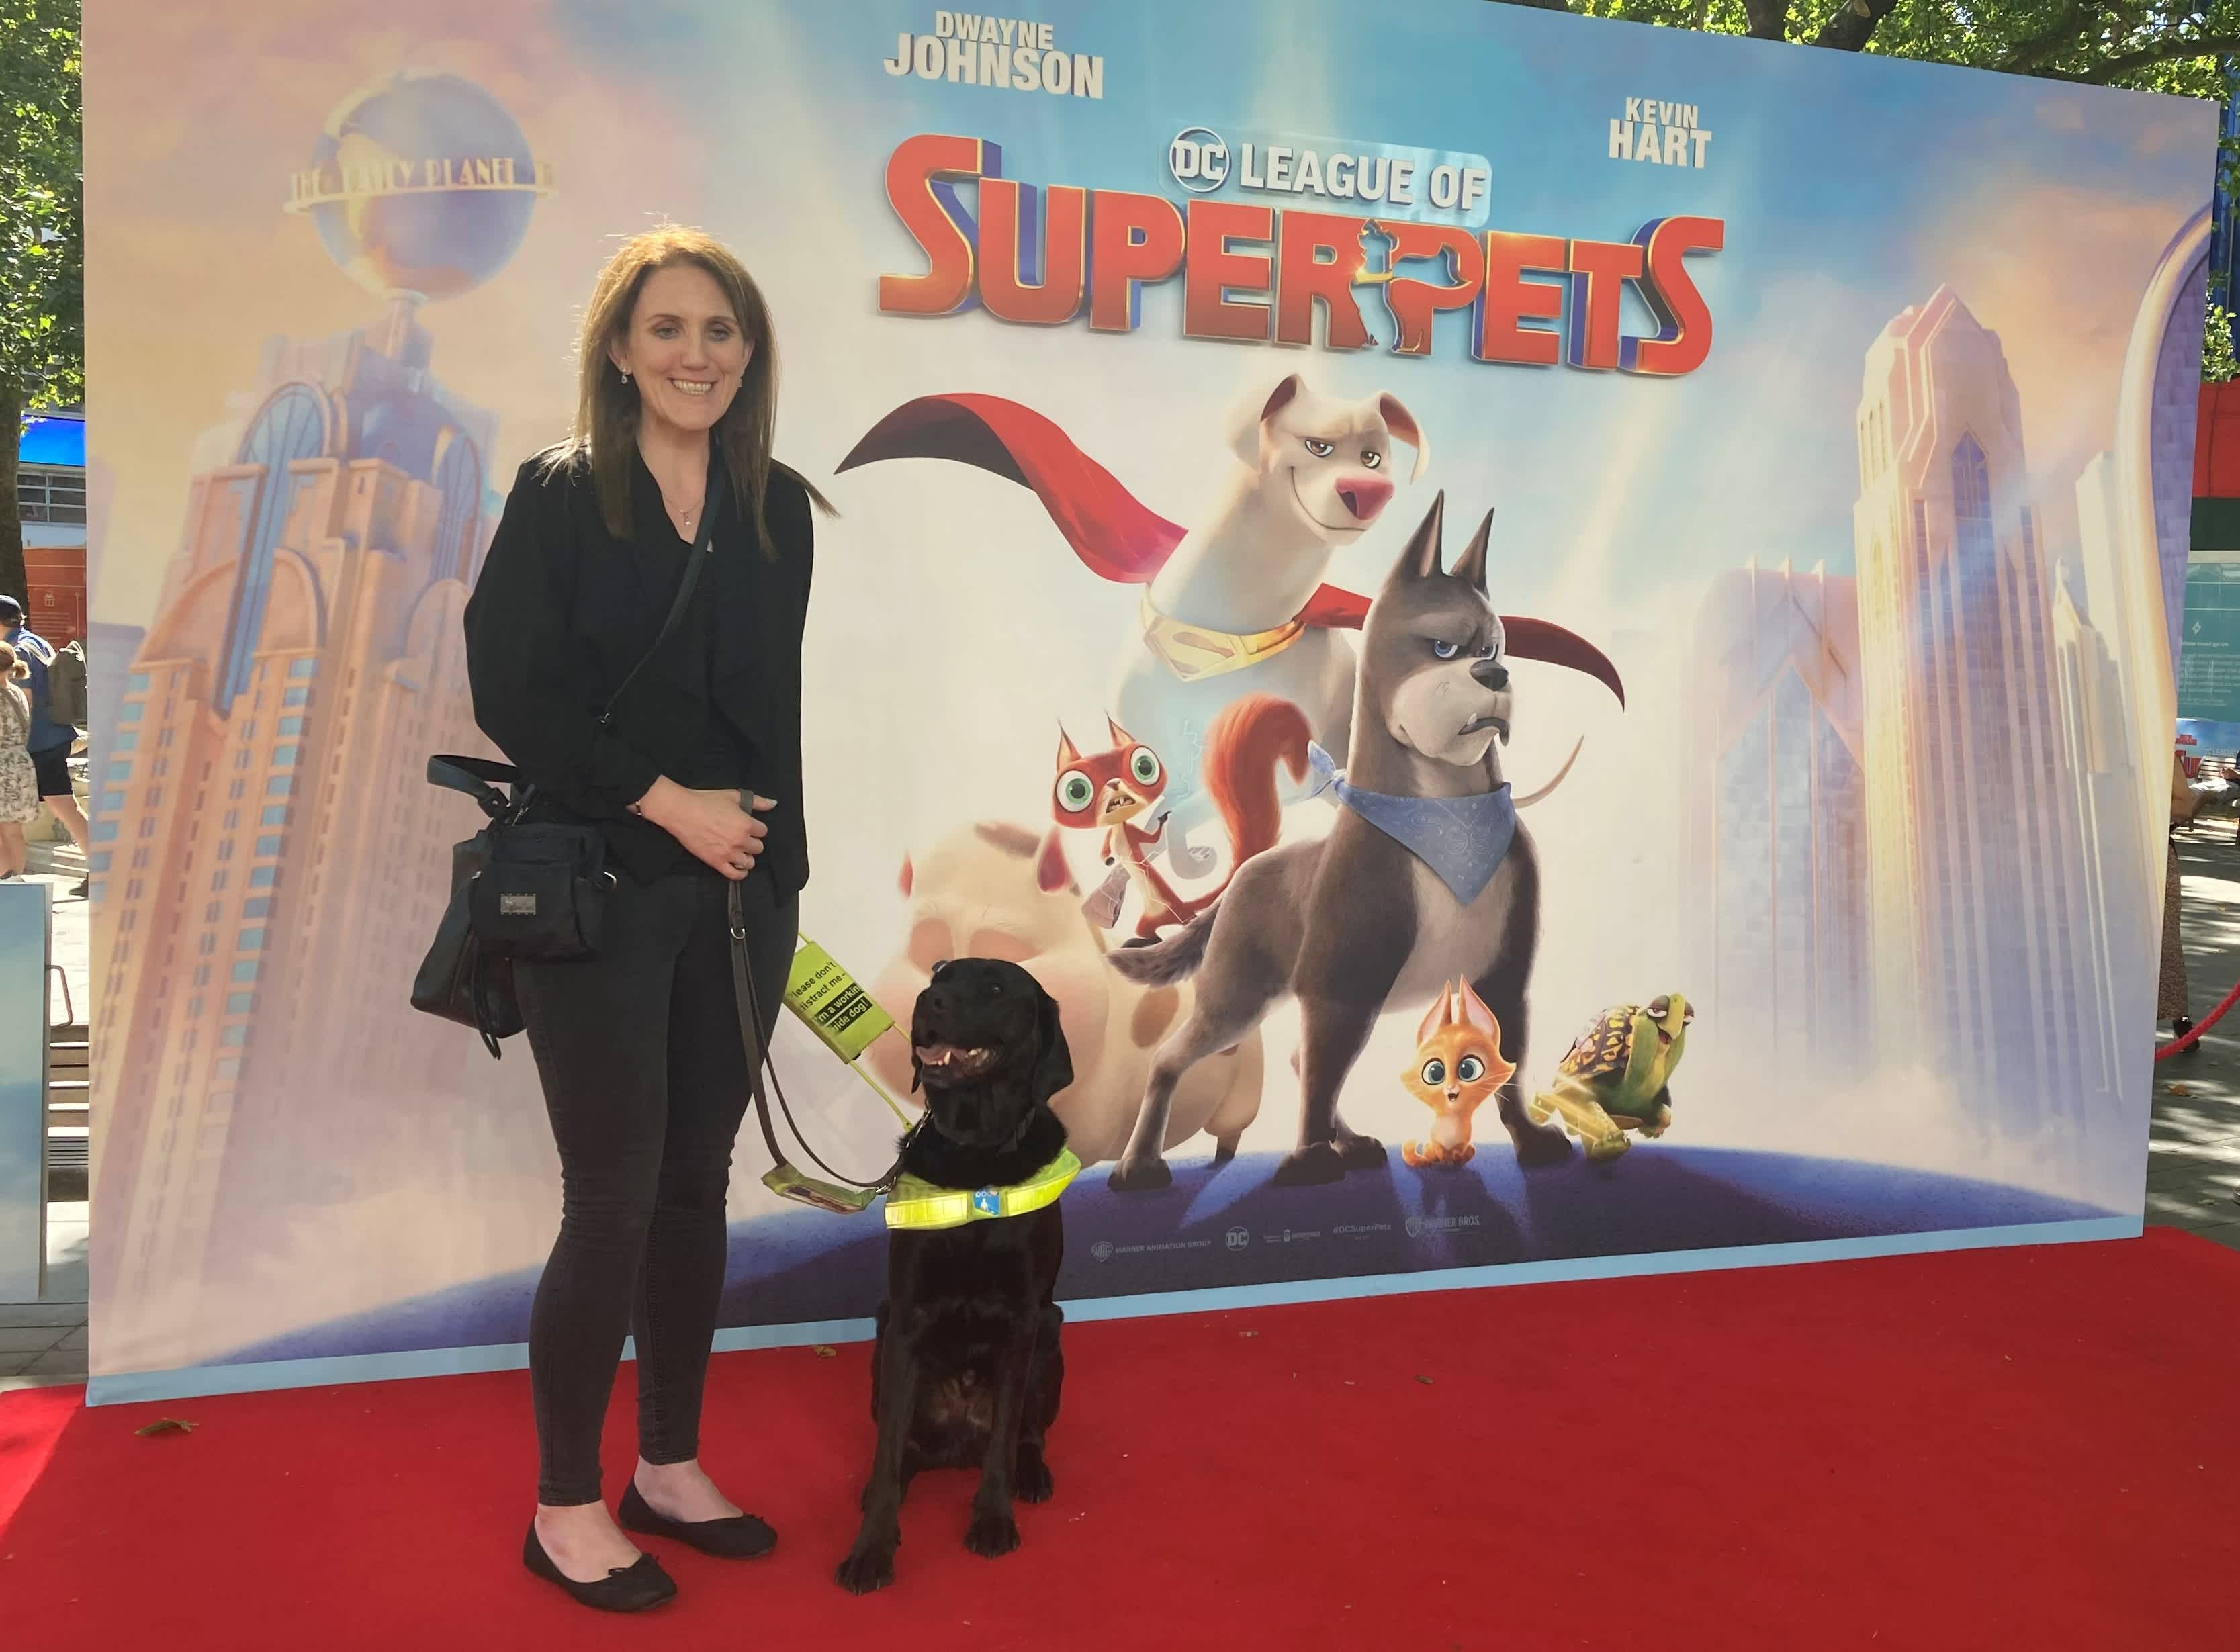 Siobhan and guide dog Marty stand on a red carpet stage in front of a poster for the new DC League of Super-Pets film. Siobhan is smiling with Marty on the lead to her left. They are standing on the left side of the poster so you can see the film's characters posing as a group in the centre and looking at the camera under the title 'DC League of Super-Pets'. 